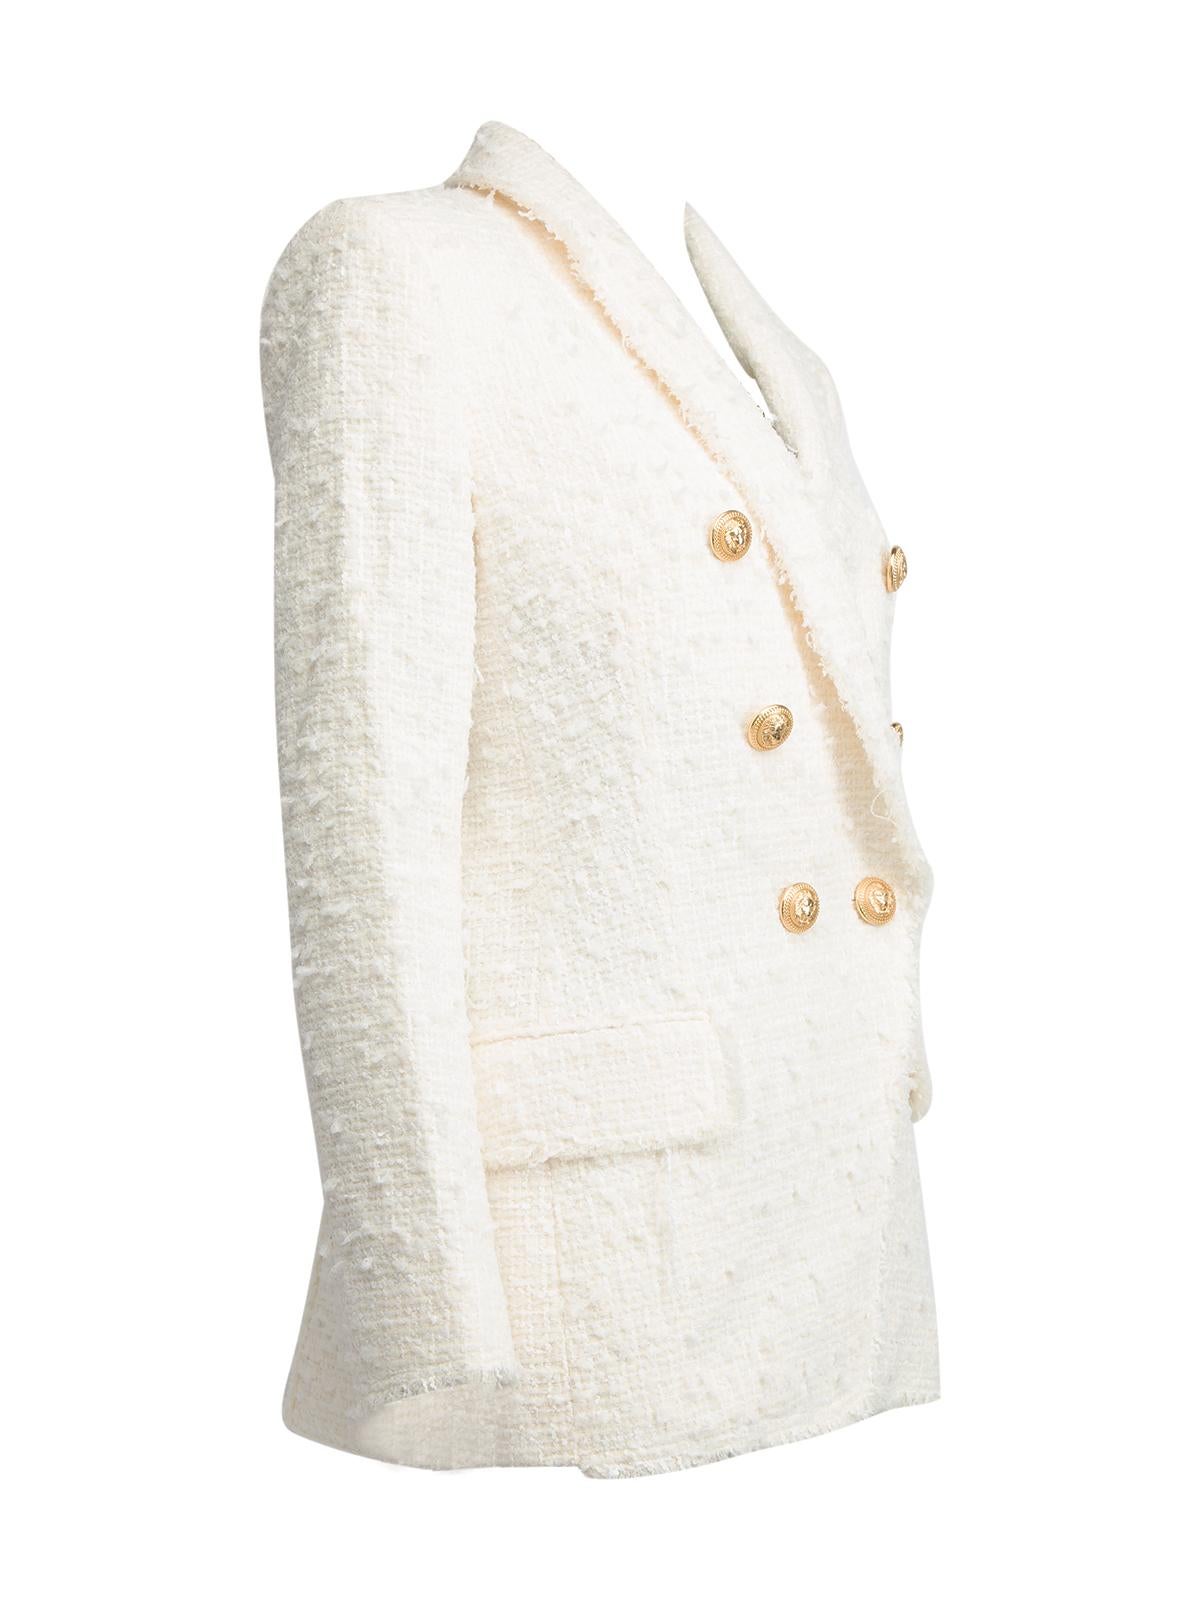 CONDITION is Never worn, with tags. No visible wear to blazer is evident on this new Balmain designer resale item. Details White Tweed Gold tone buttons 2 hip pockets 1 x breast pocket Double breasted Long sleeves V Neckline Made in Poland